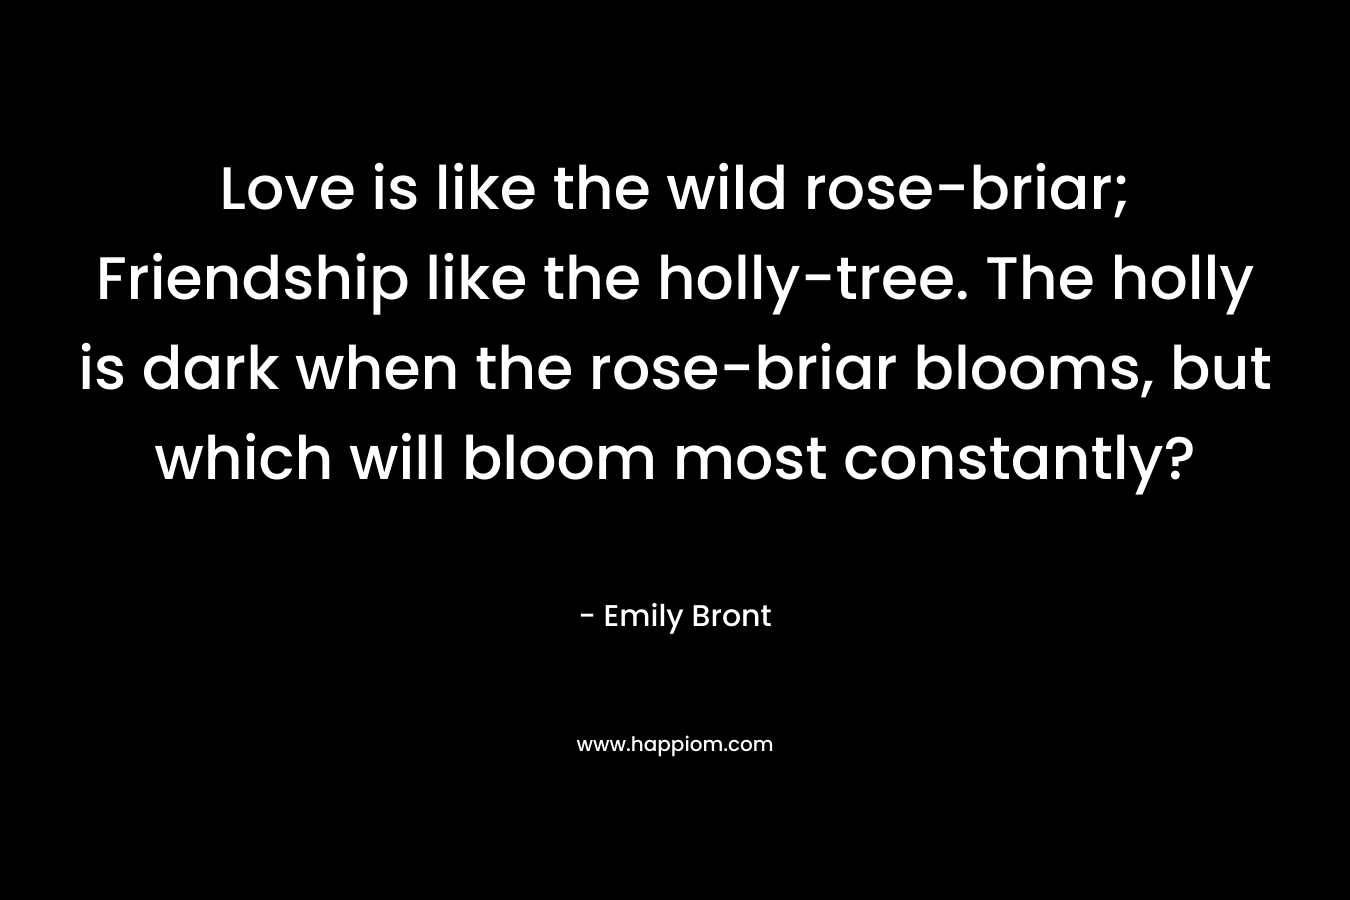 Love is like the wild rose-briar; Friendship like the holly-tree. The holly is dark when the rose-briar blooms, but which will bloom most constantly? – Emily Bront